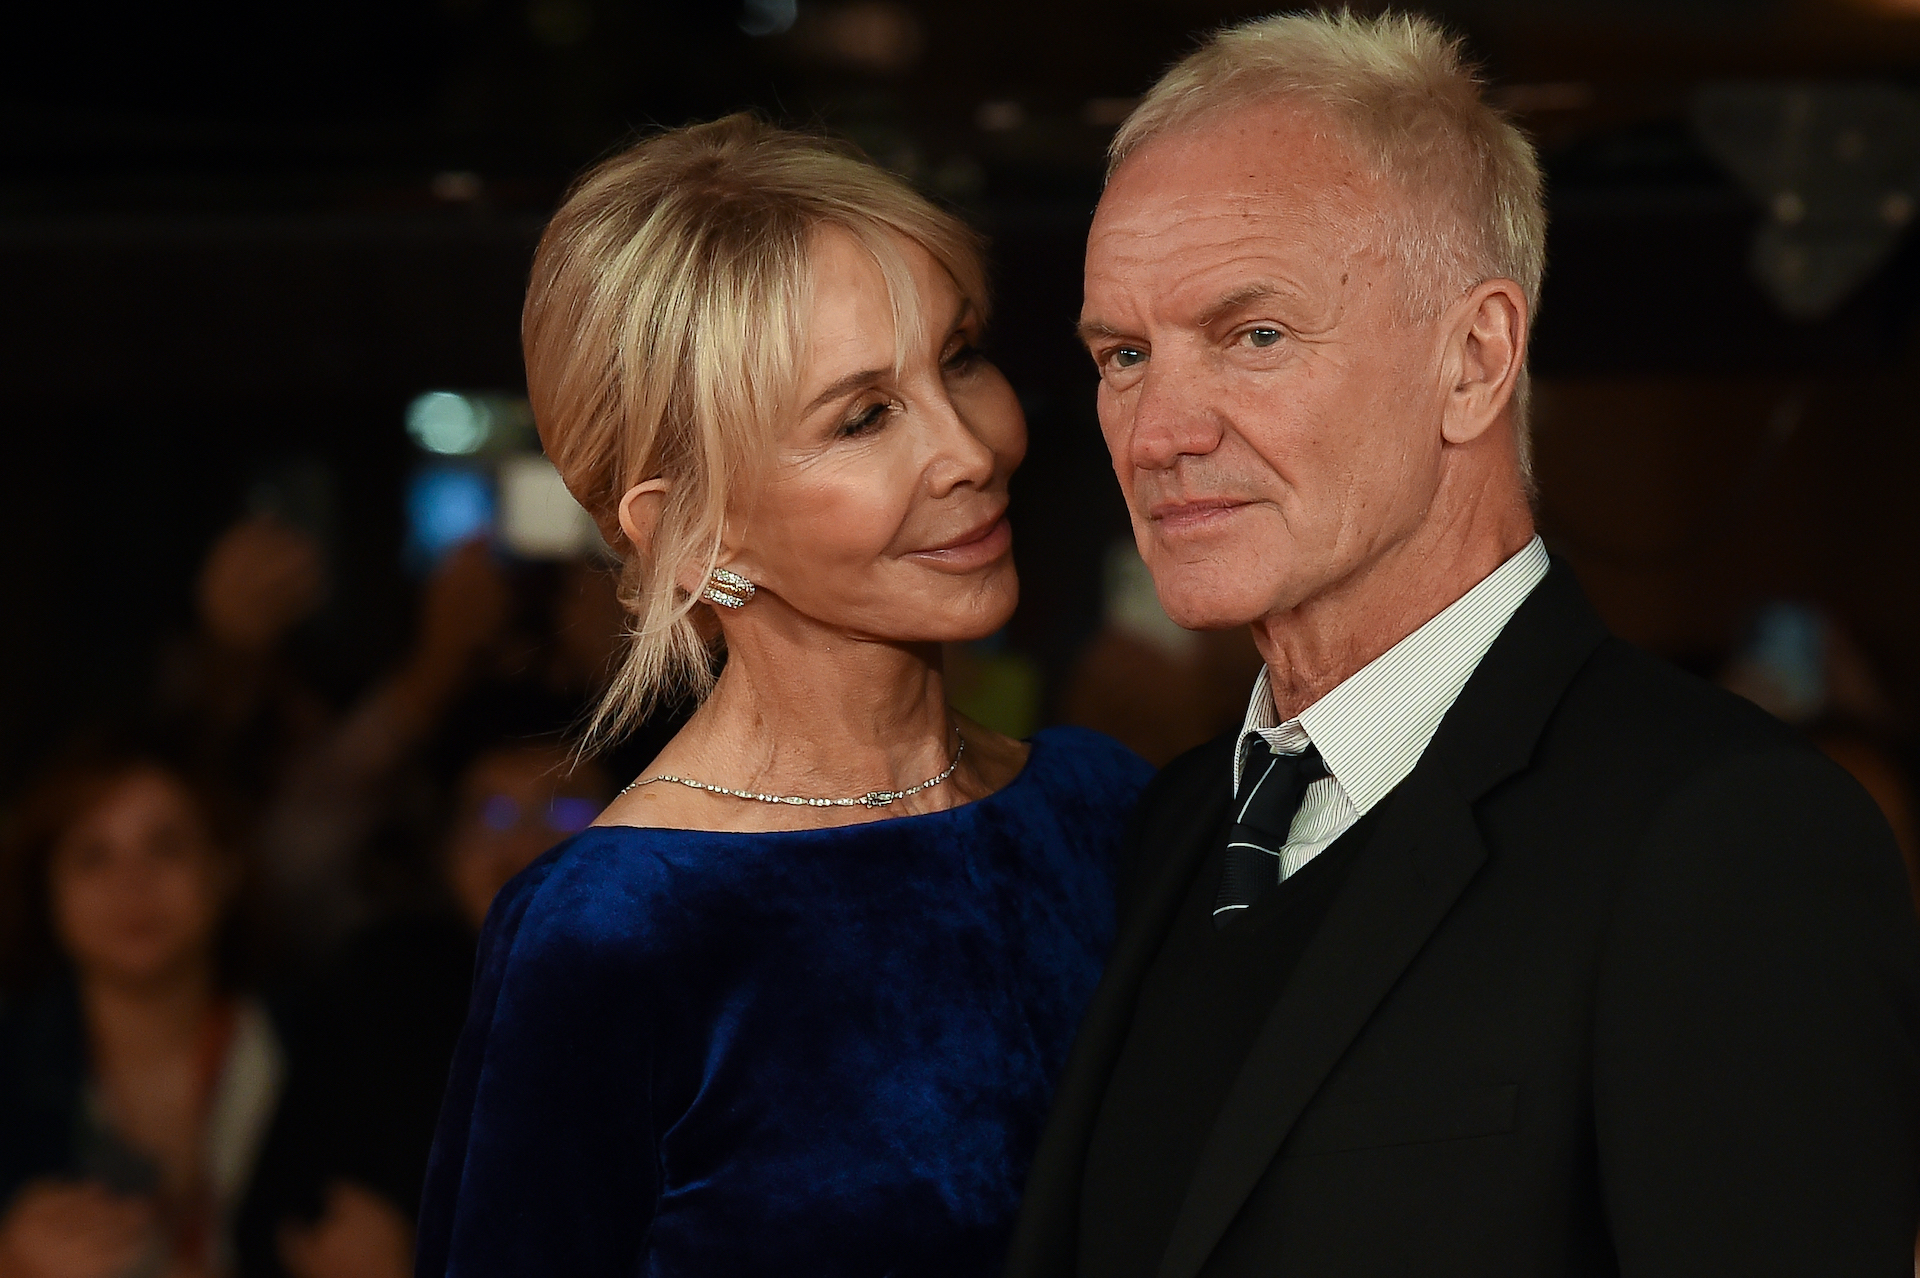 Sting and his wife